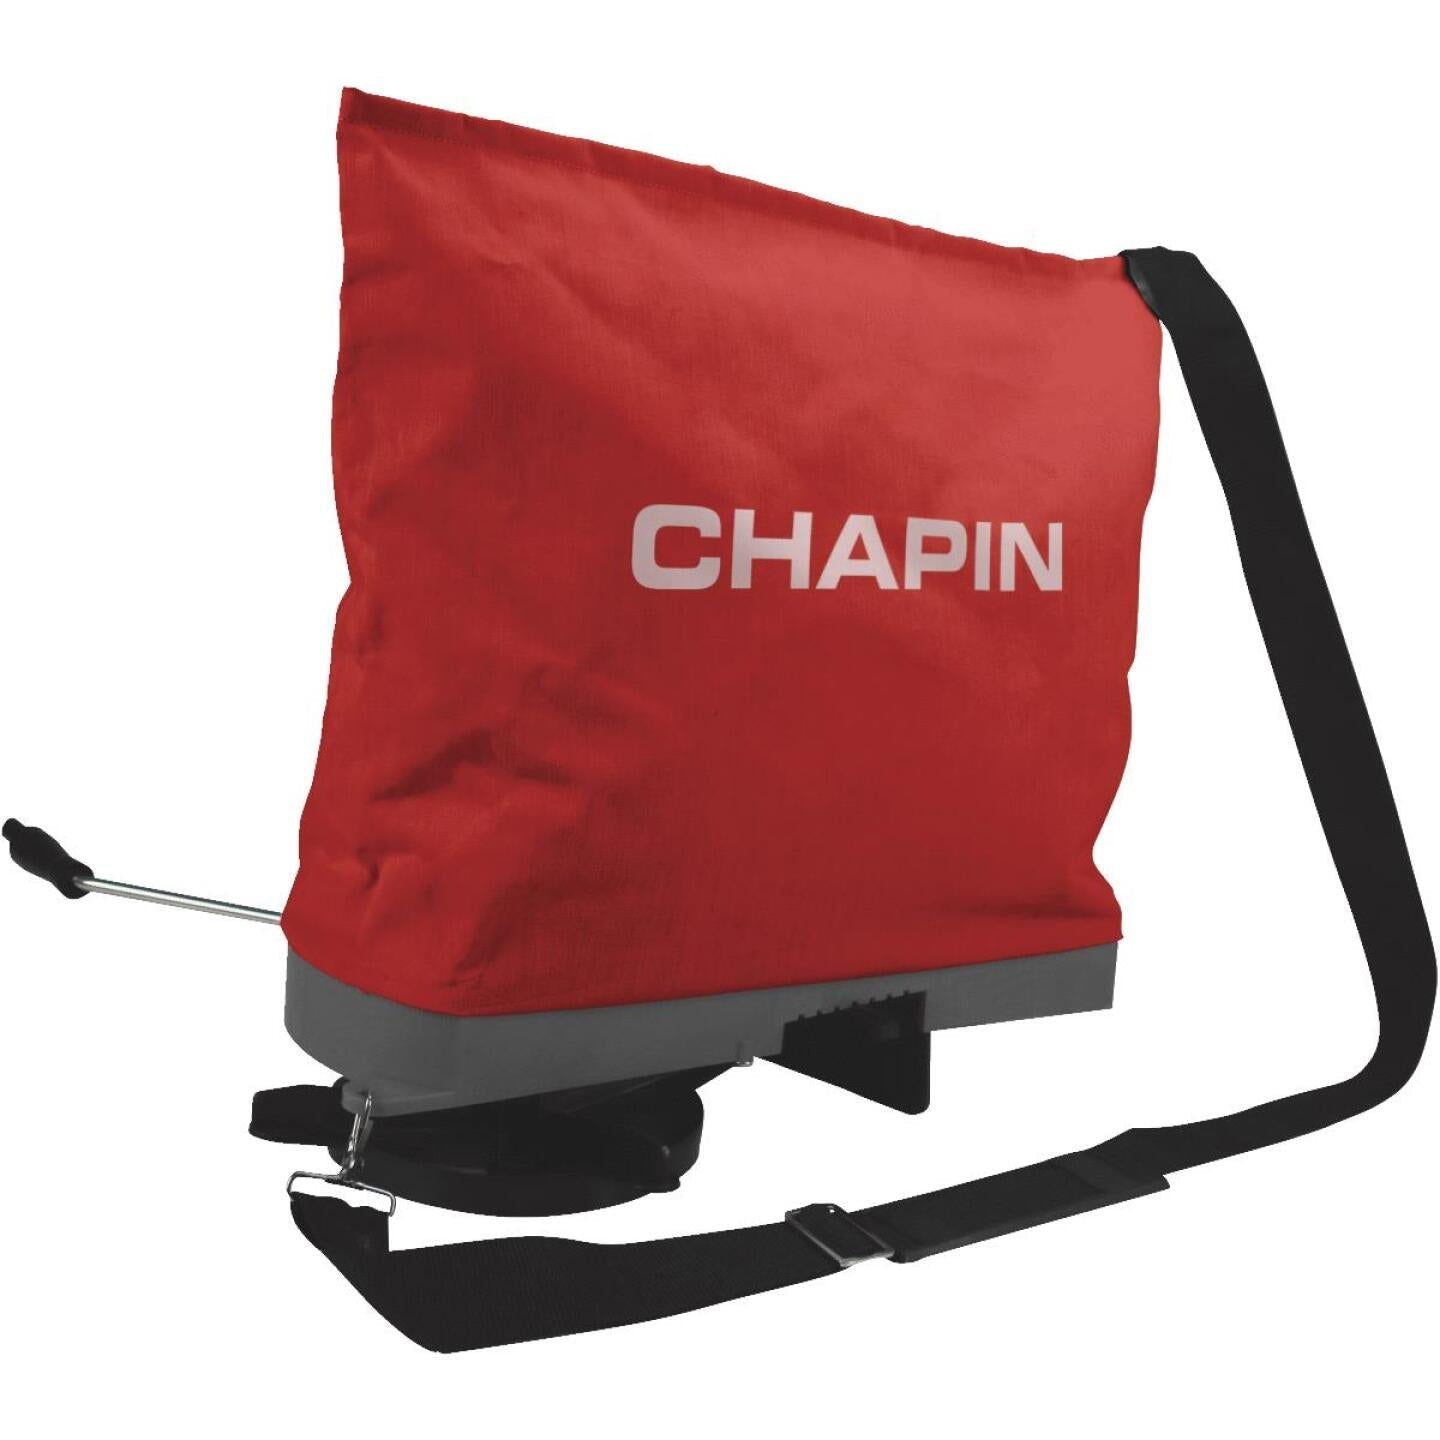 CHAPIN, Chapin Professional Spreader & Seeder